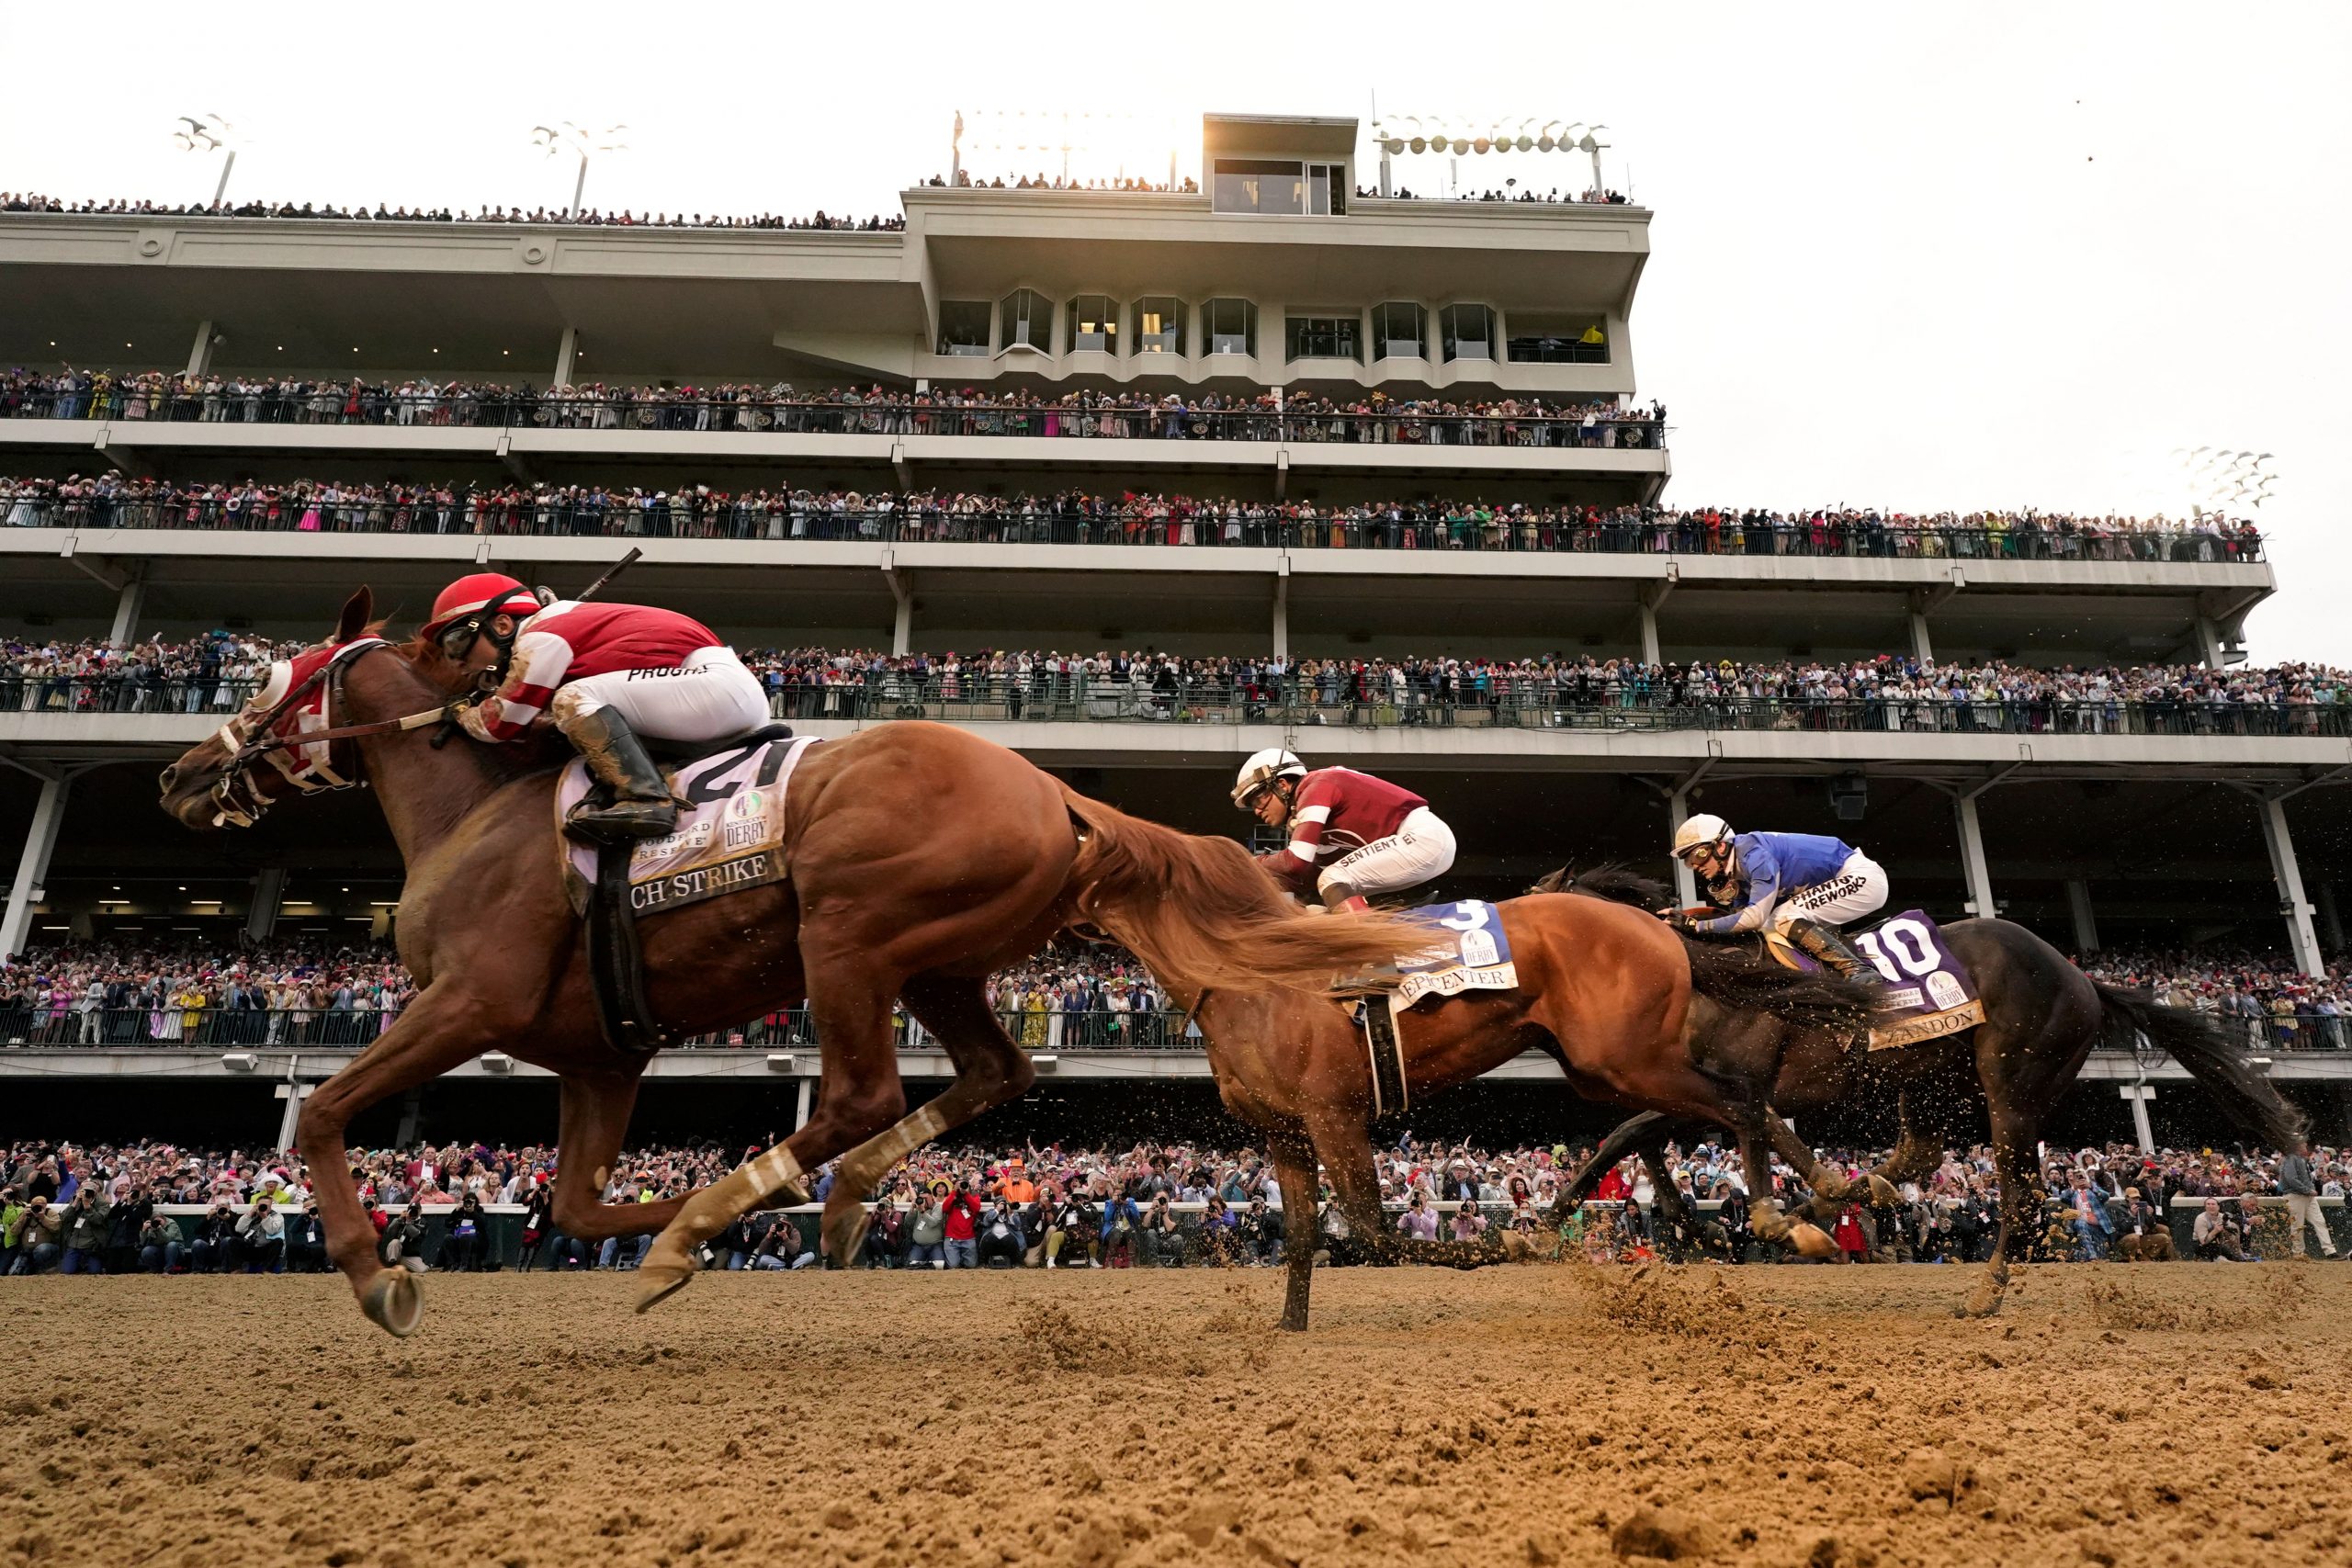 All about Preakness Stakes, the middle derby in Triple Crown